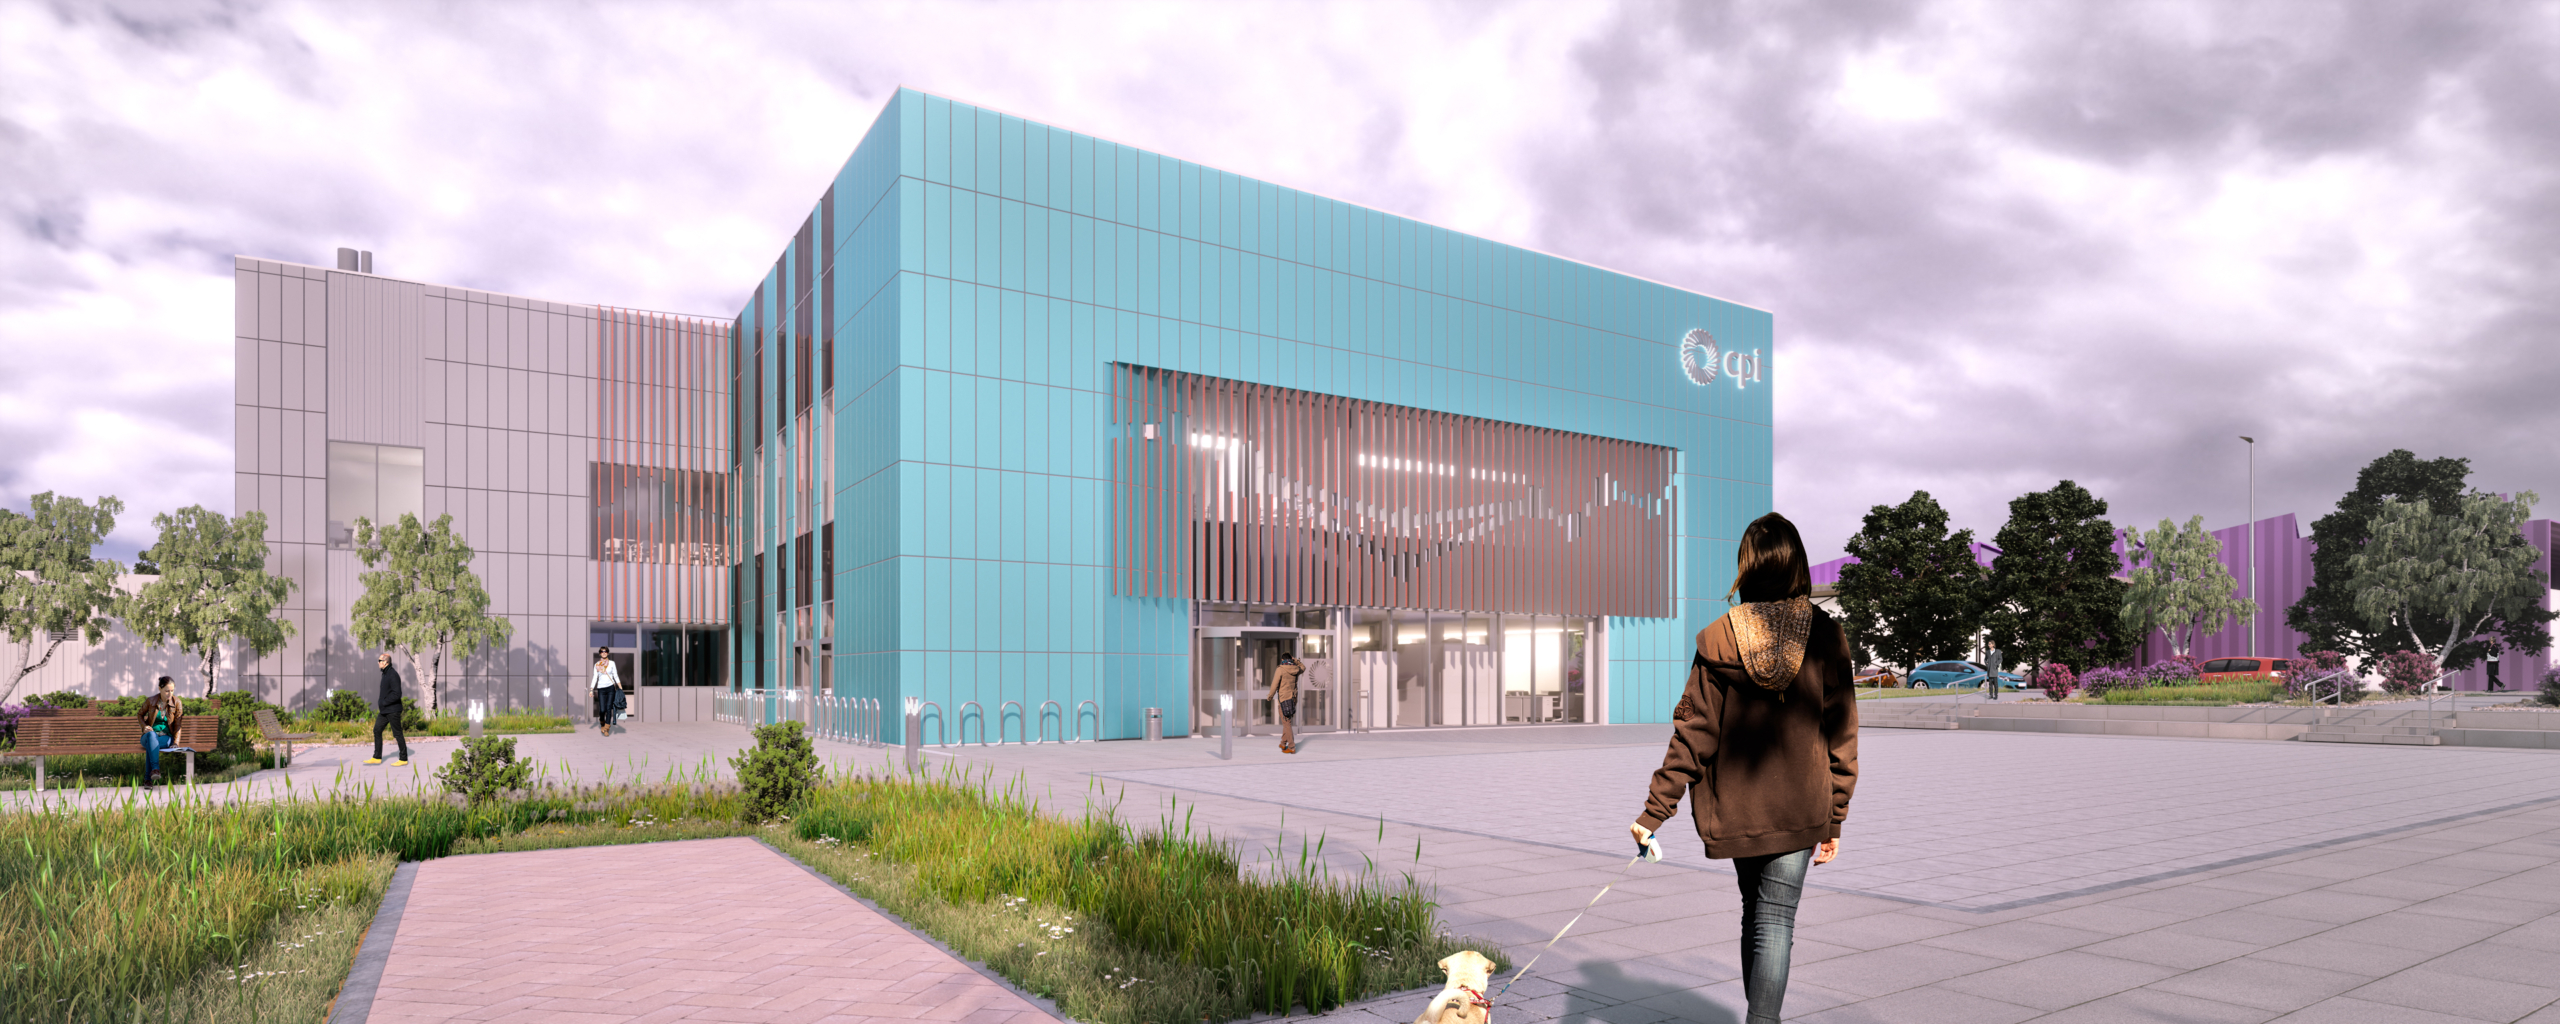 Artist’s rendering of the Medicines Manufacturing Innovation Centre in Renfrewshire, UK